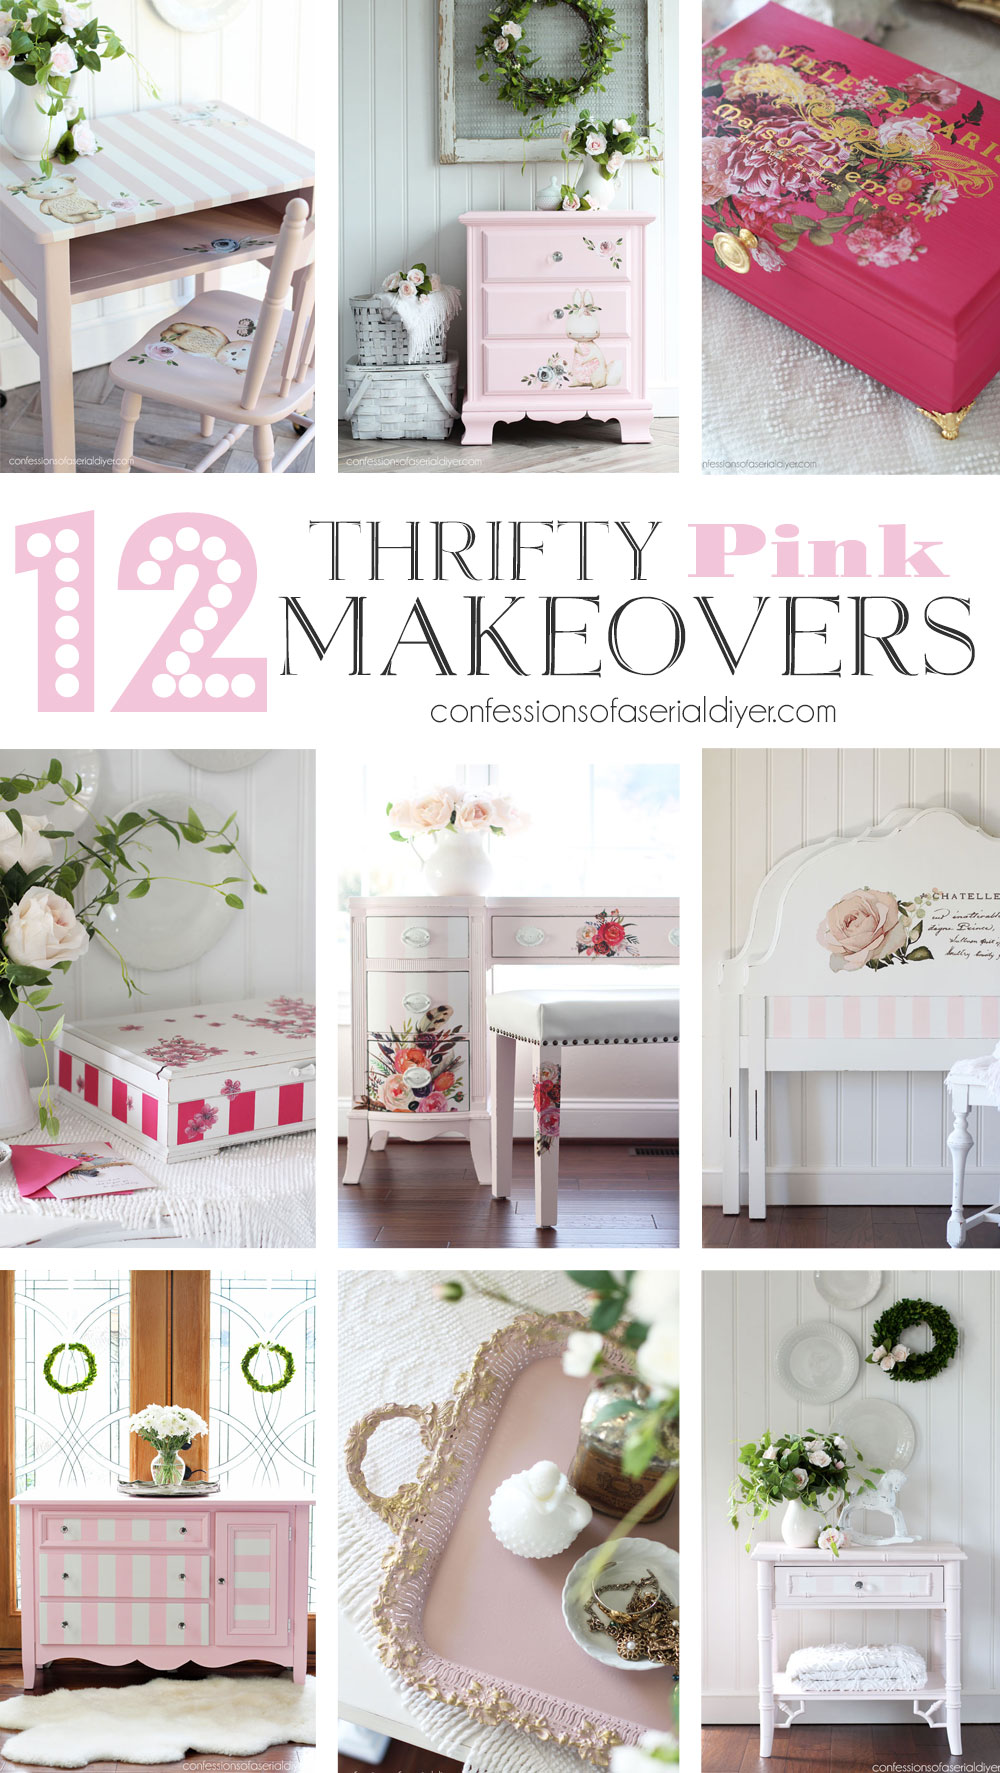 12 Thrifty Pink Makeovers